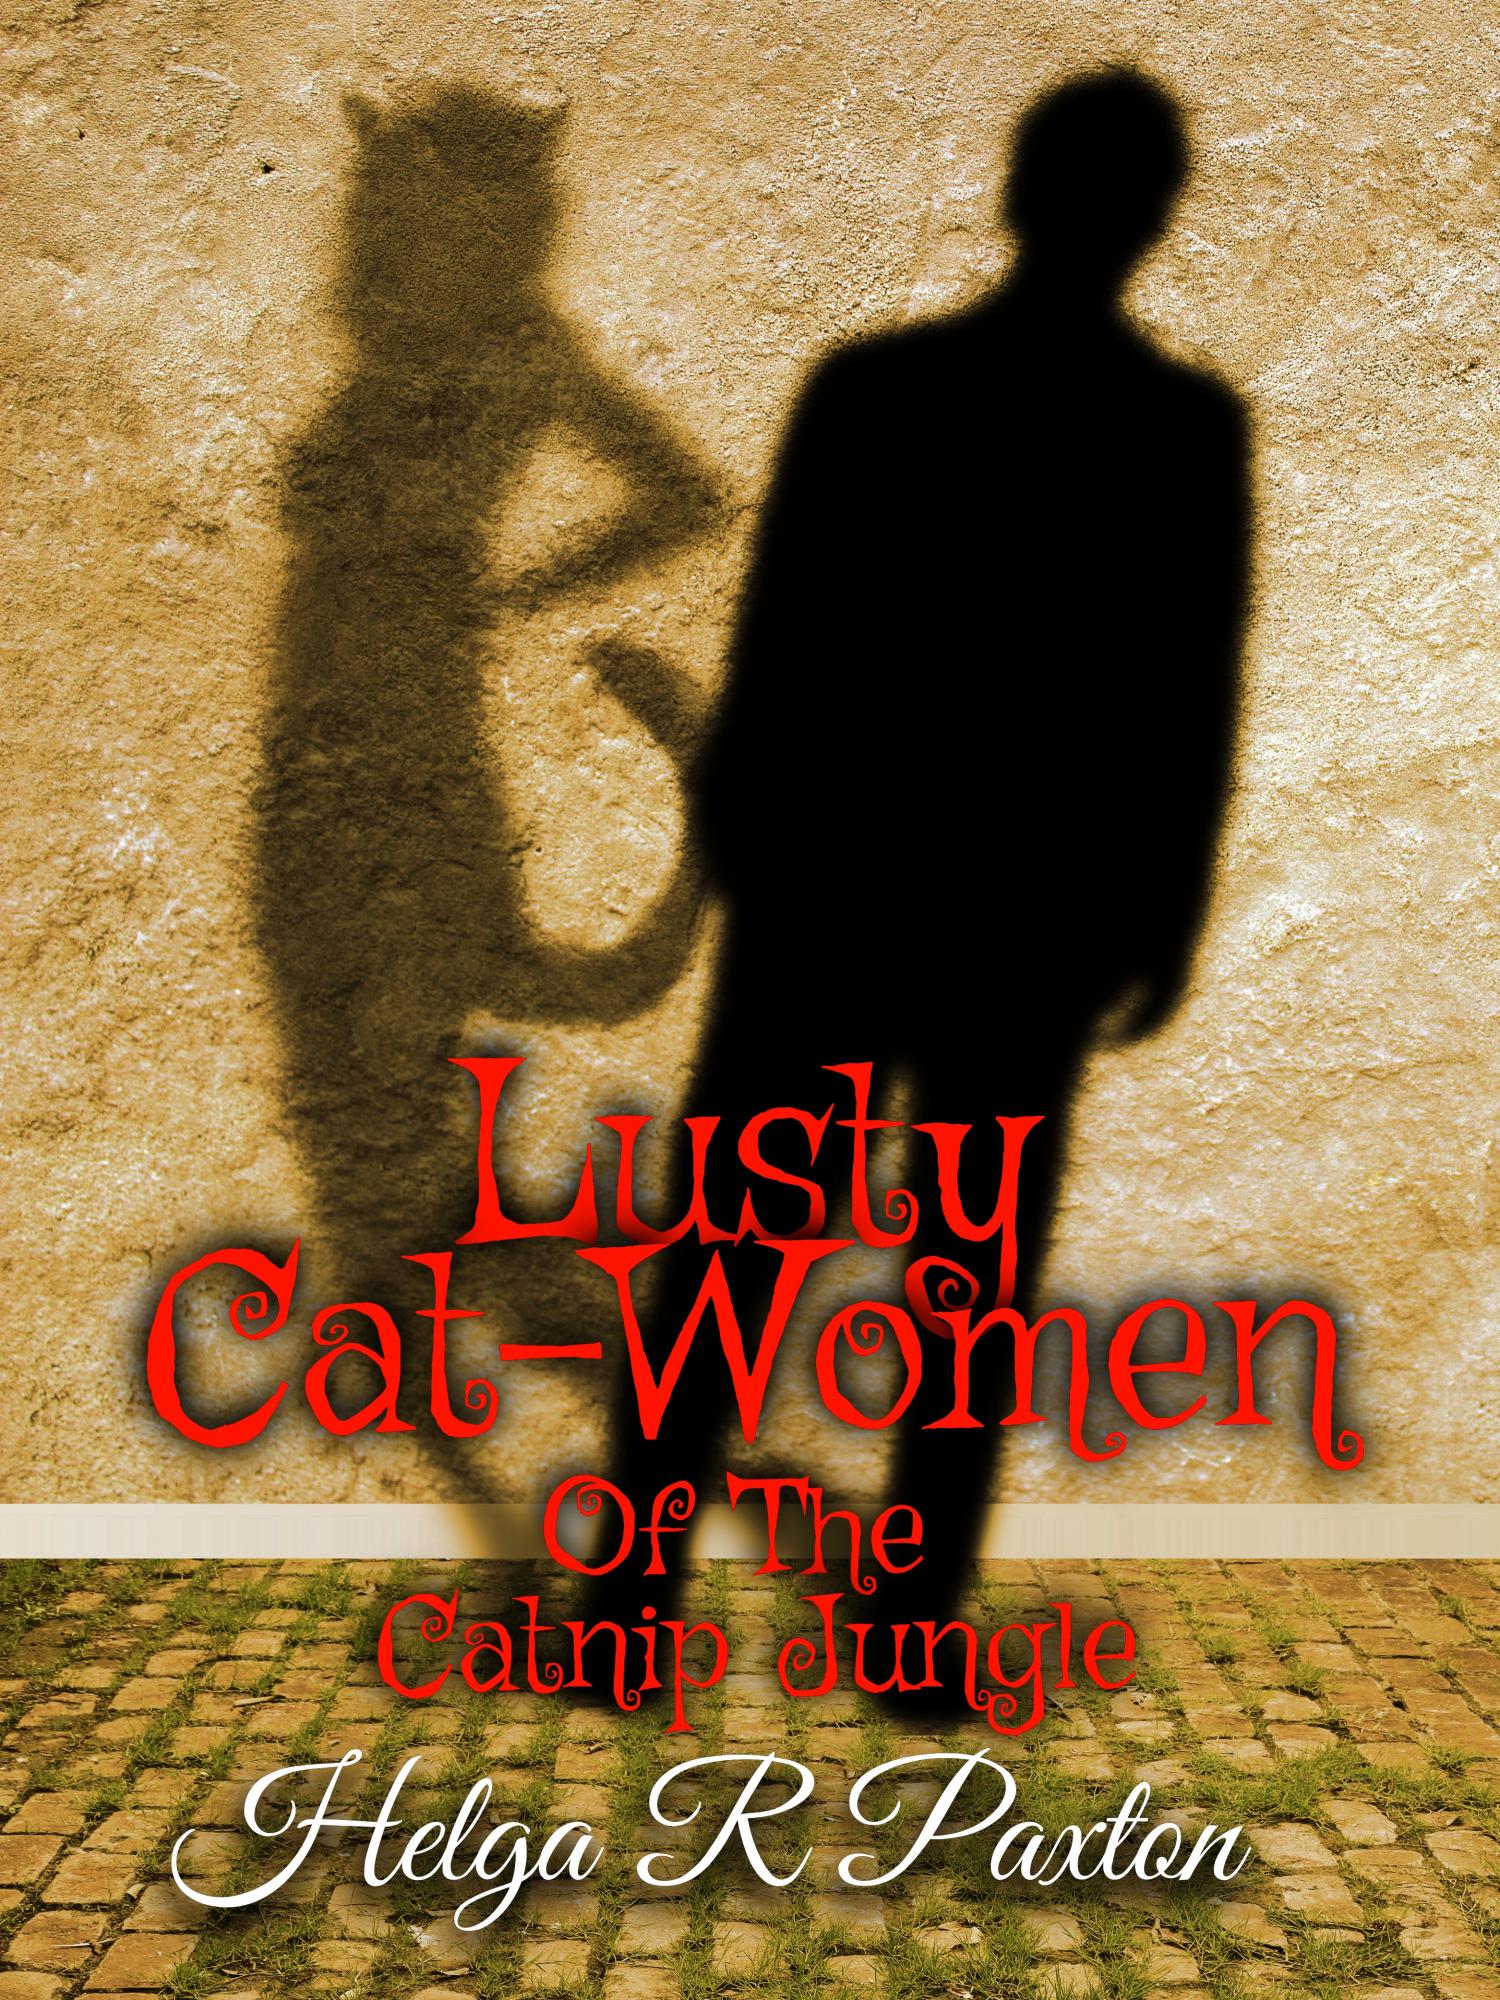 Lusty Cat-women of the Catnip Jungle by Helga R Paxton; 12/18/2018